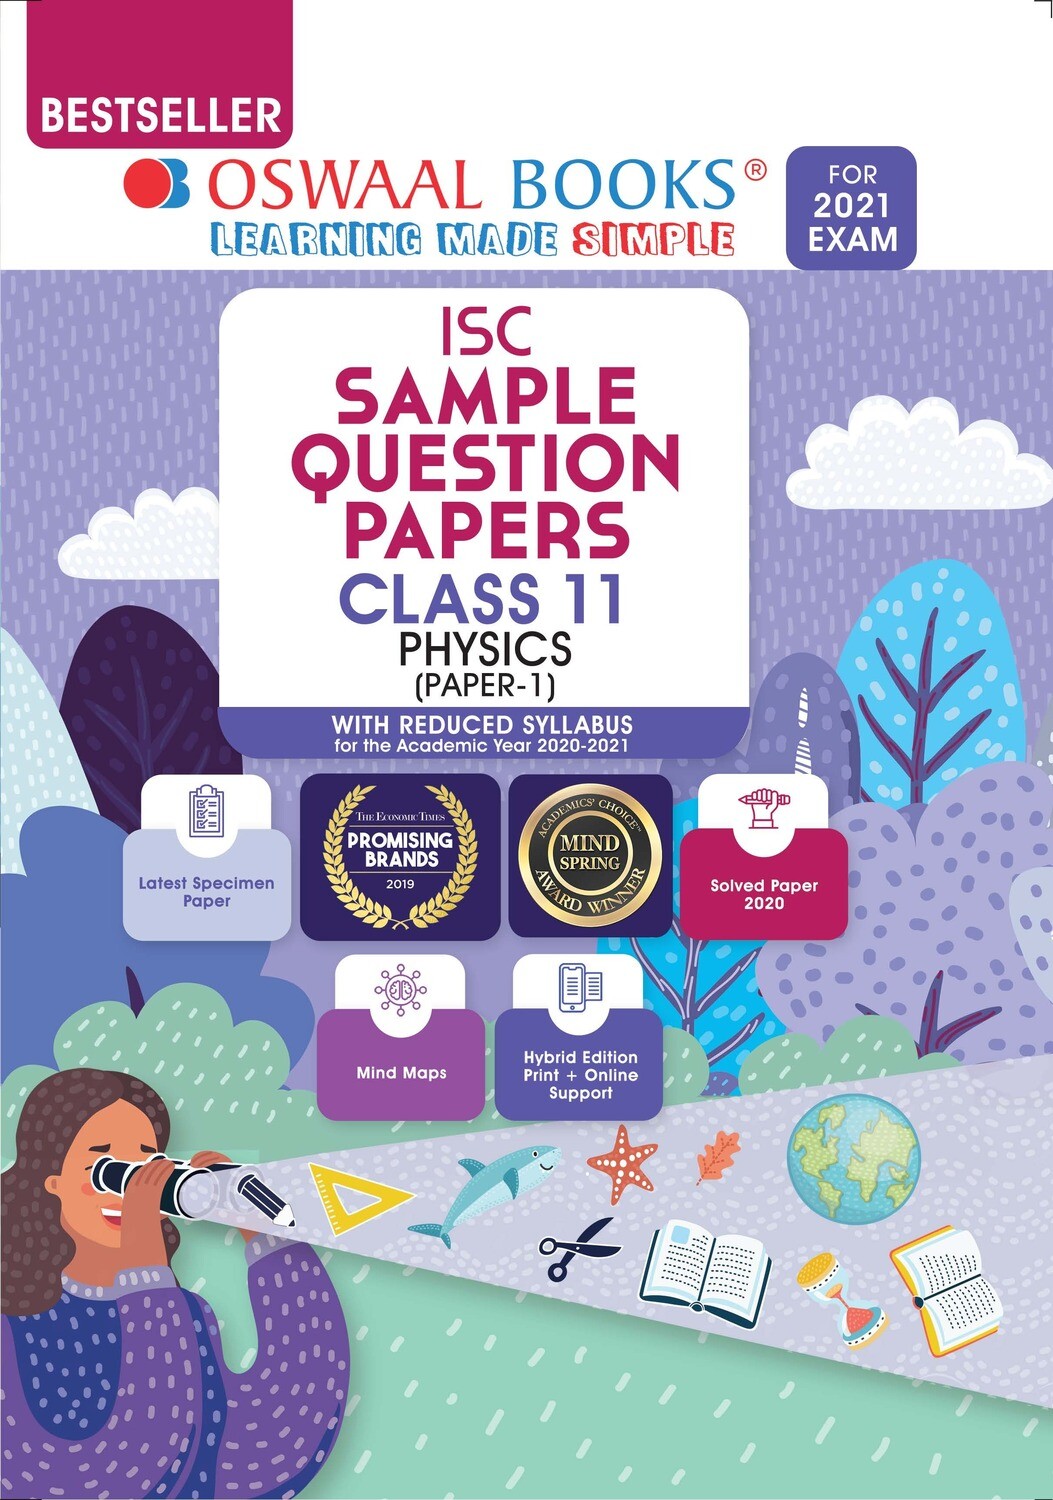 Buy e-book: Oswaal ISC Sample Question Paper Class 11 Physics (For 2021 Exam): 9789354232671